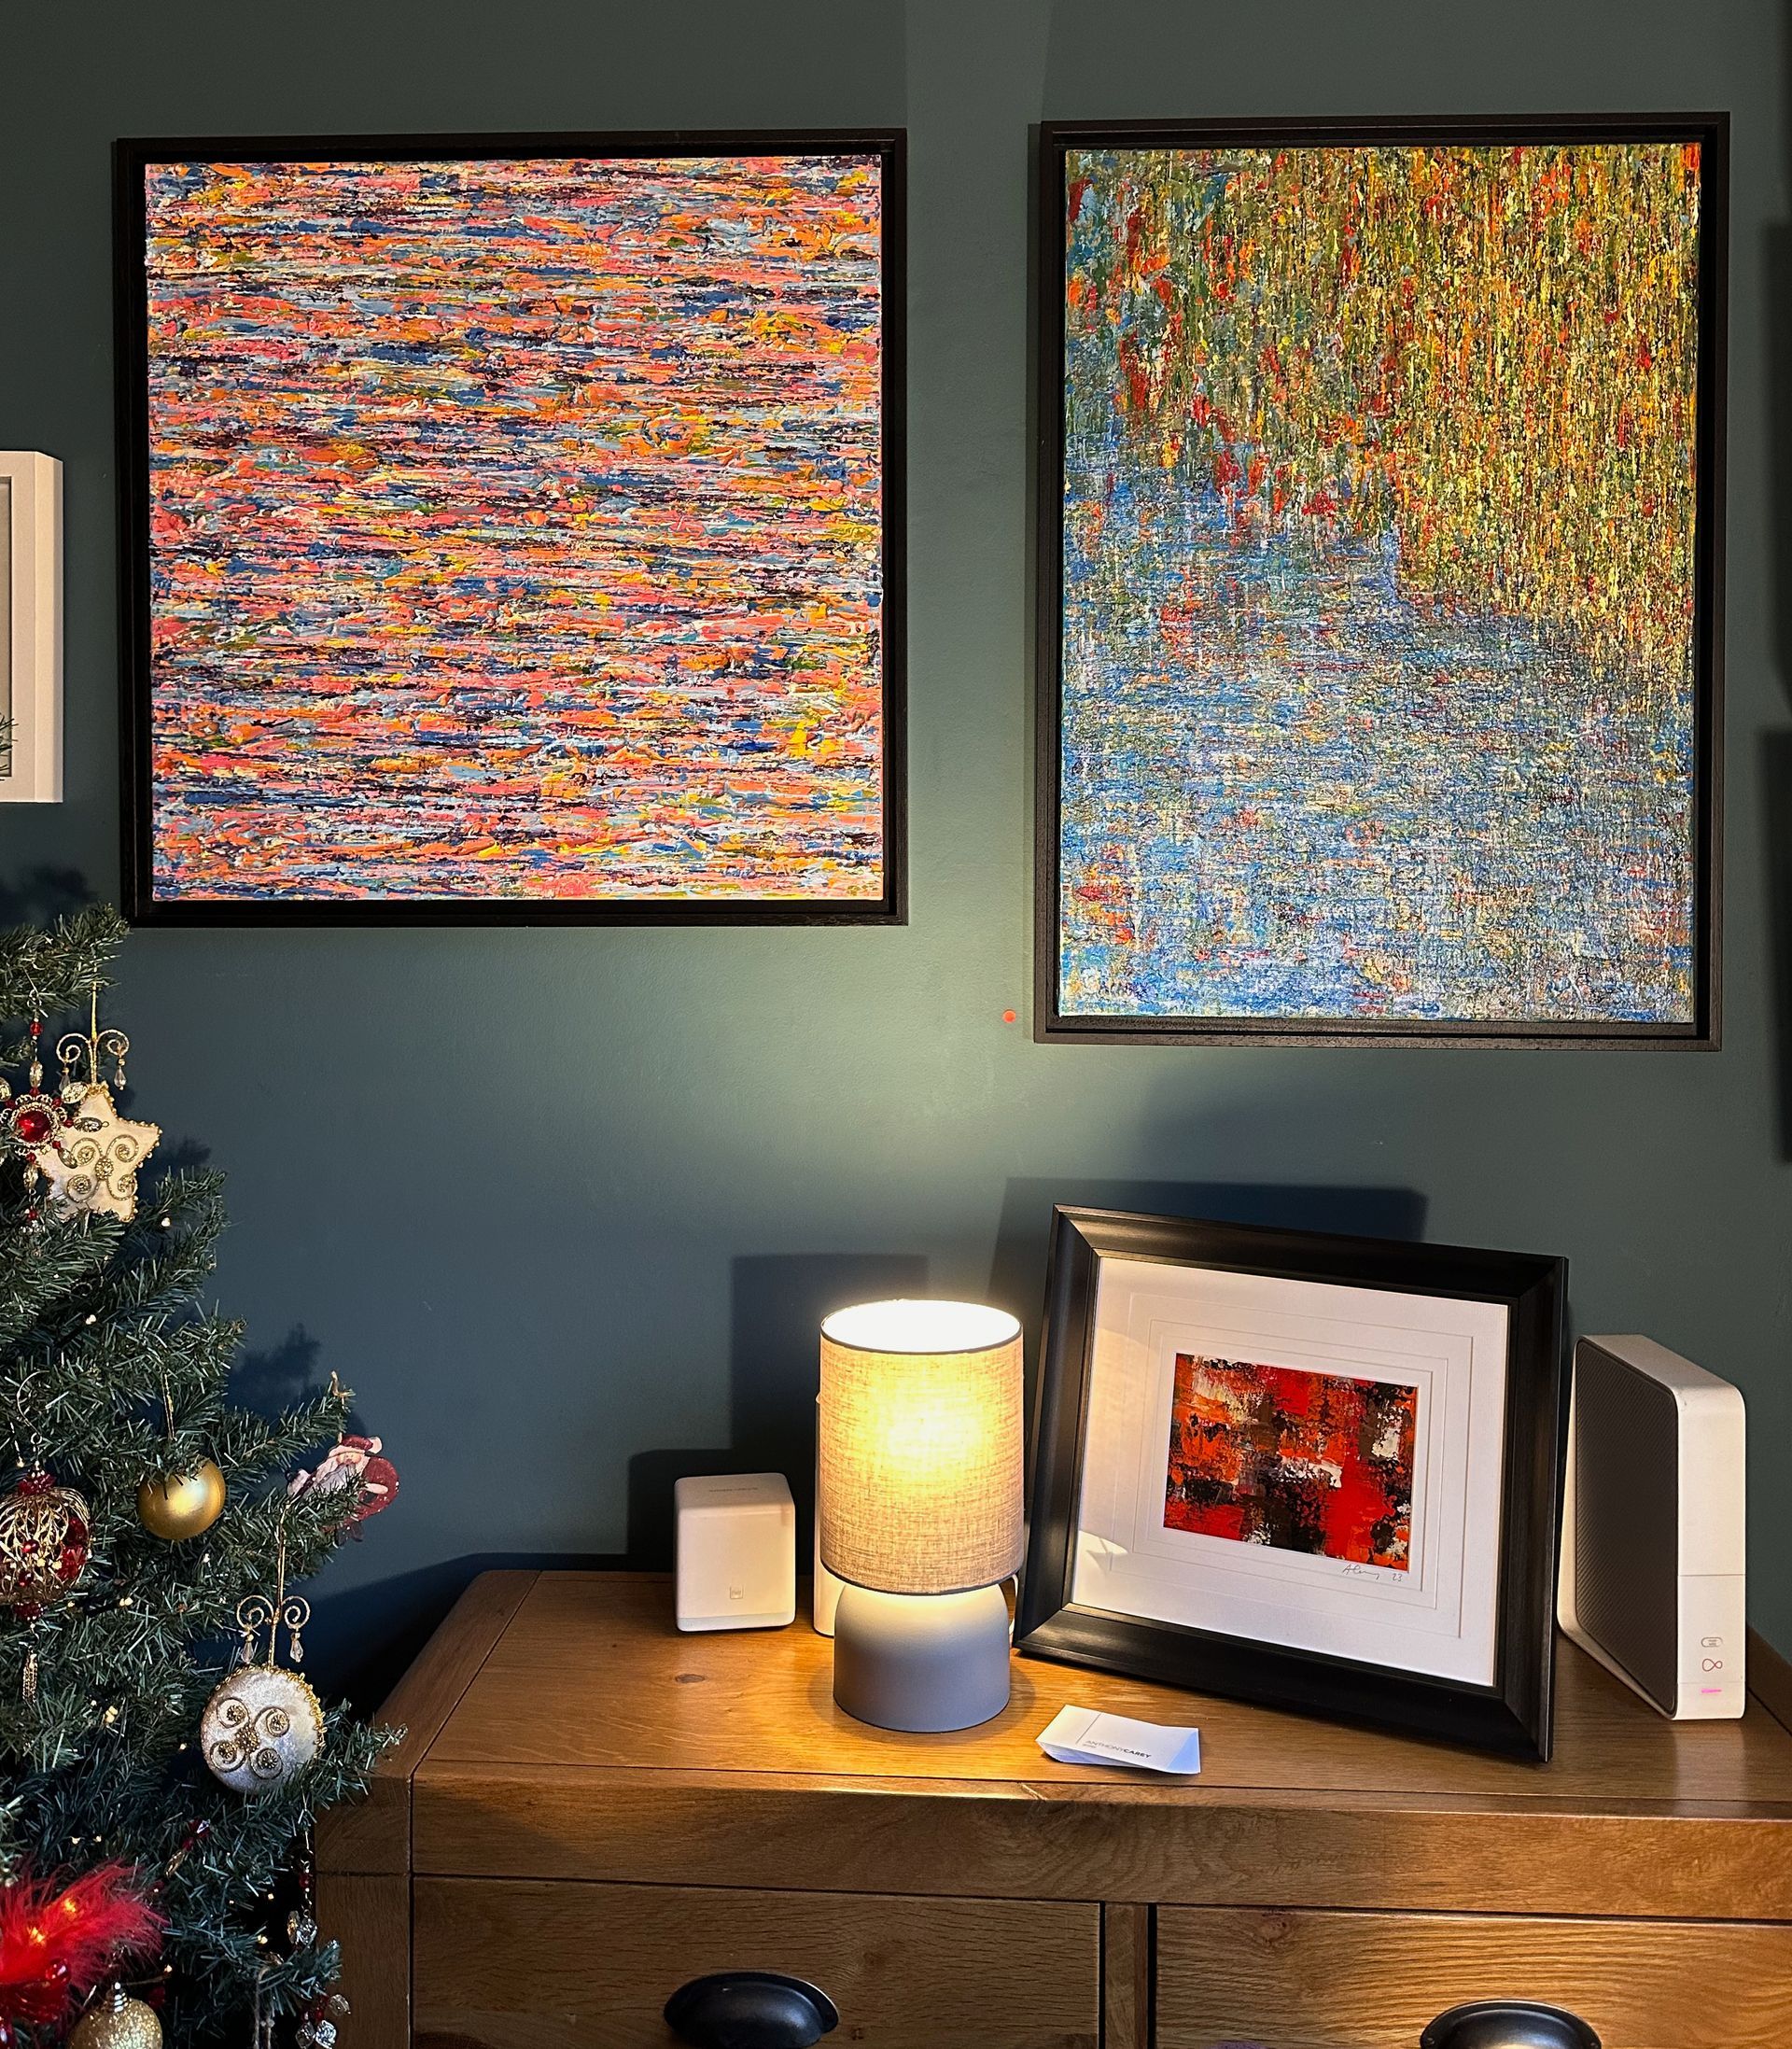 Two large abstract paintings hang on the artists wall. in the foreground is a side table with a small lamp and a framed small abstract painting in a black frame